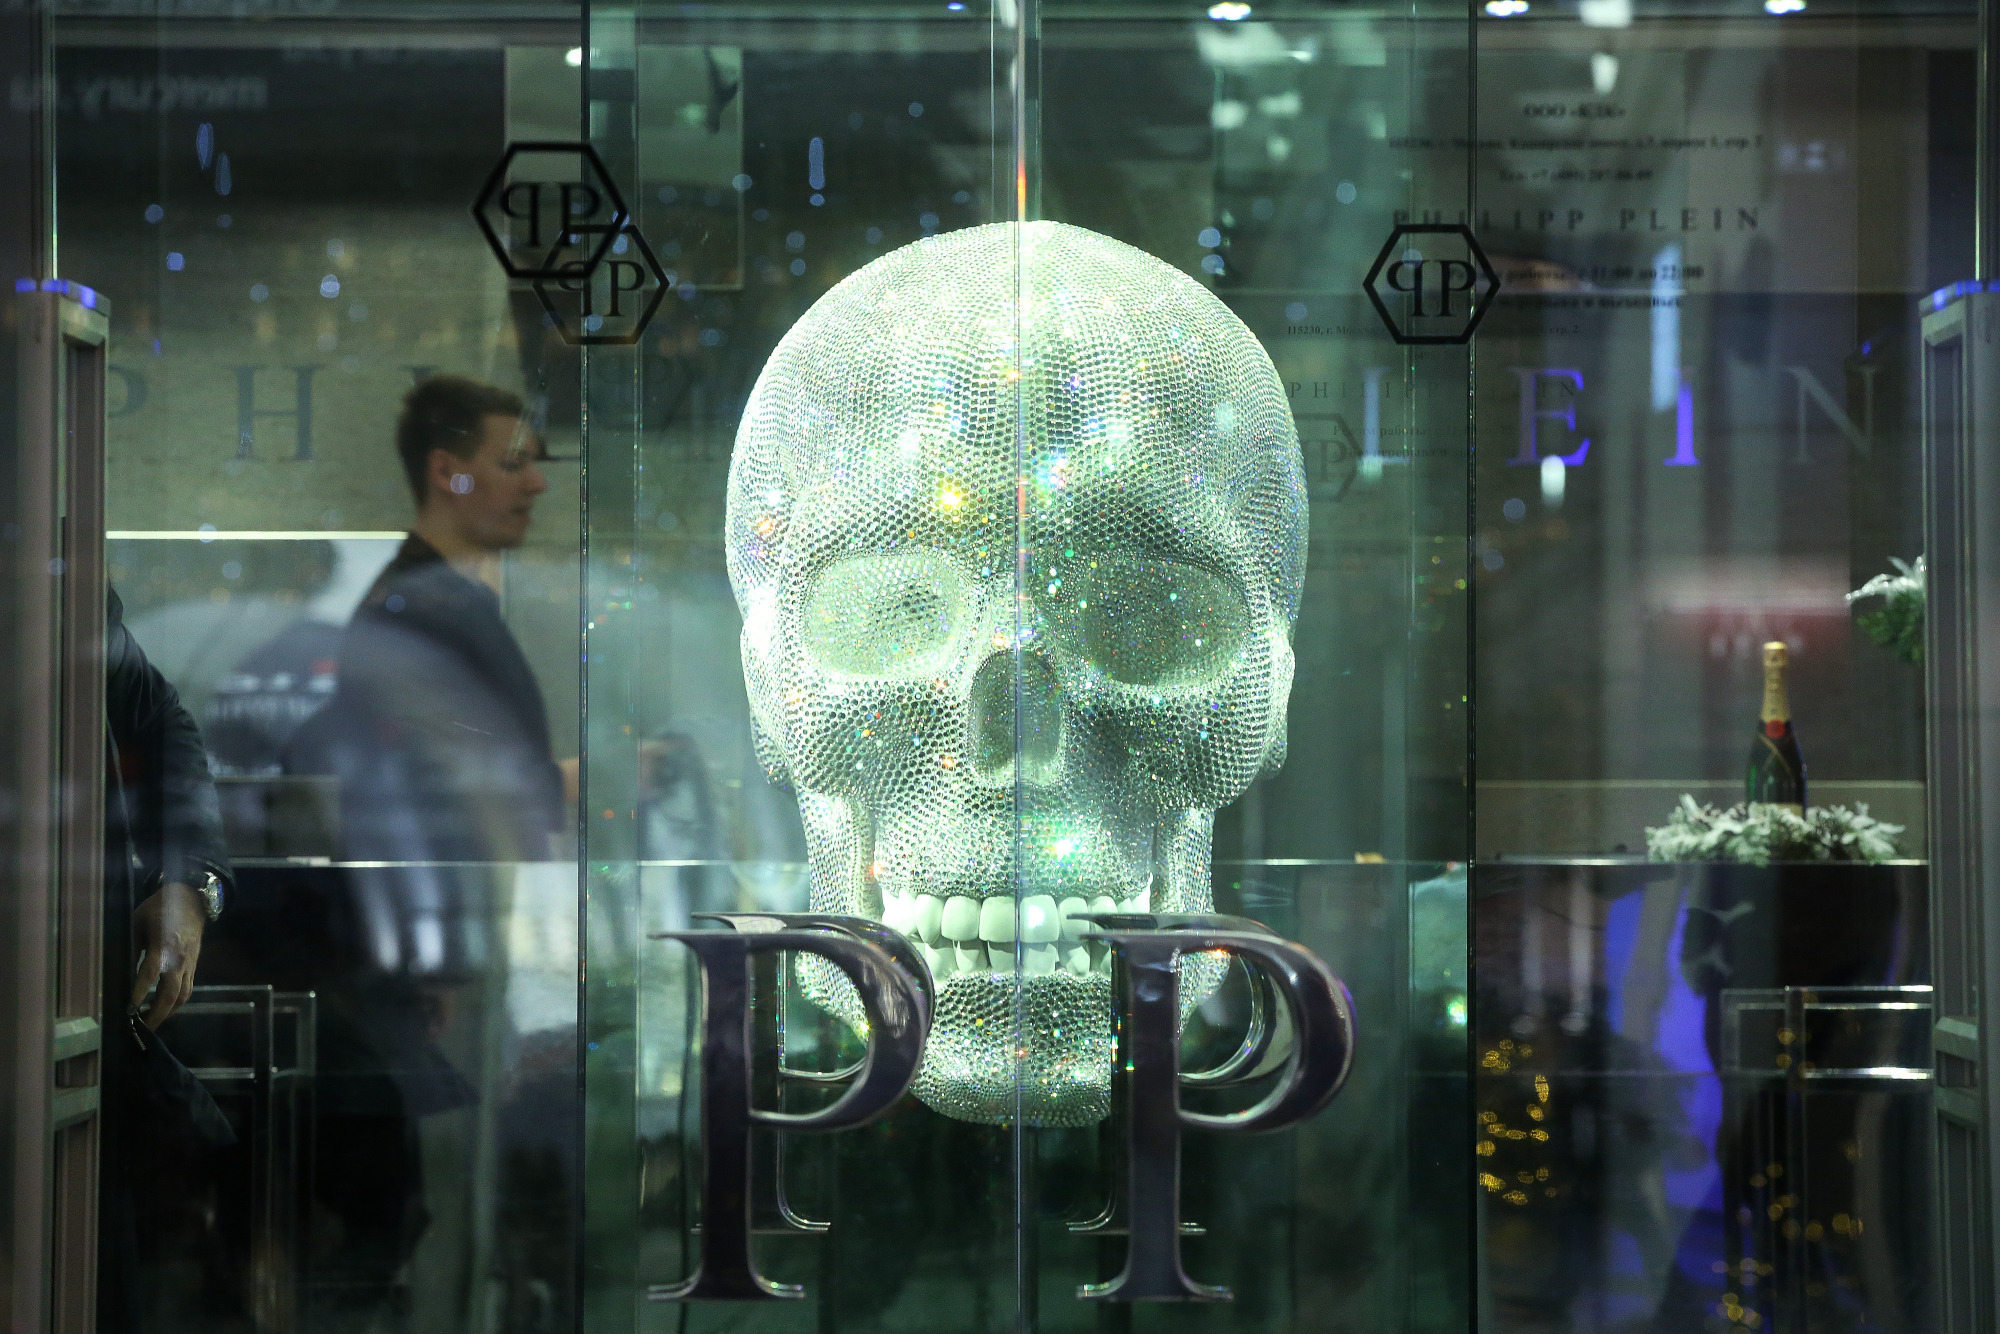 Philipp Plein Outspoken on Changes in Fashion, Company Adjustments